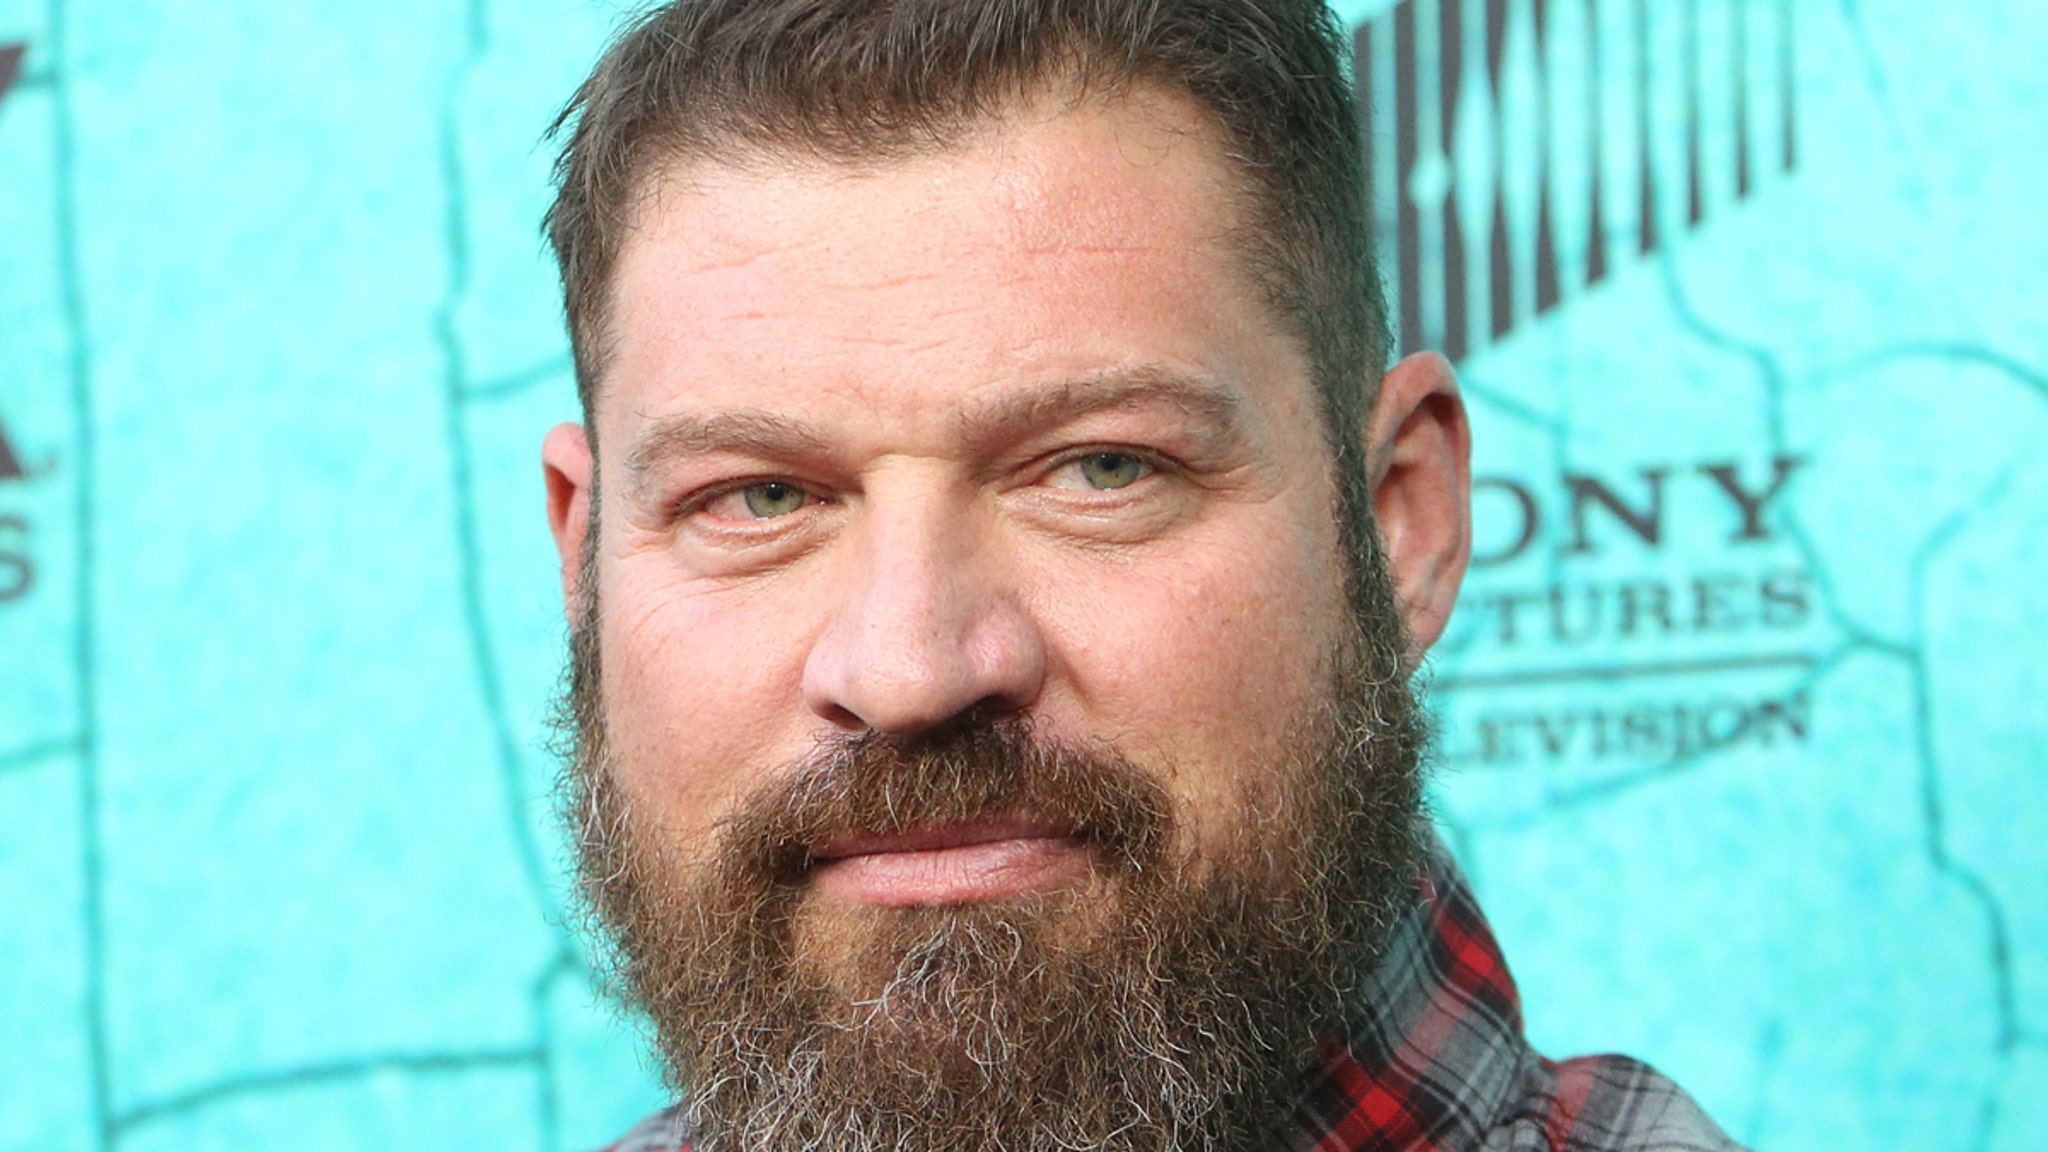 ‘Orange Is The New Black’ actor Brad William Henke has died at the age of 56